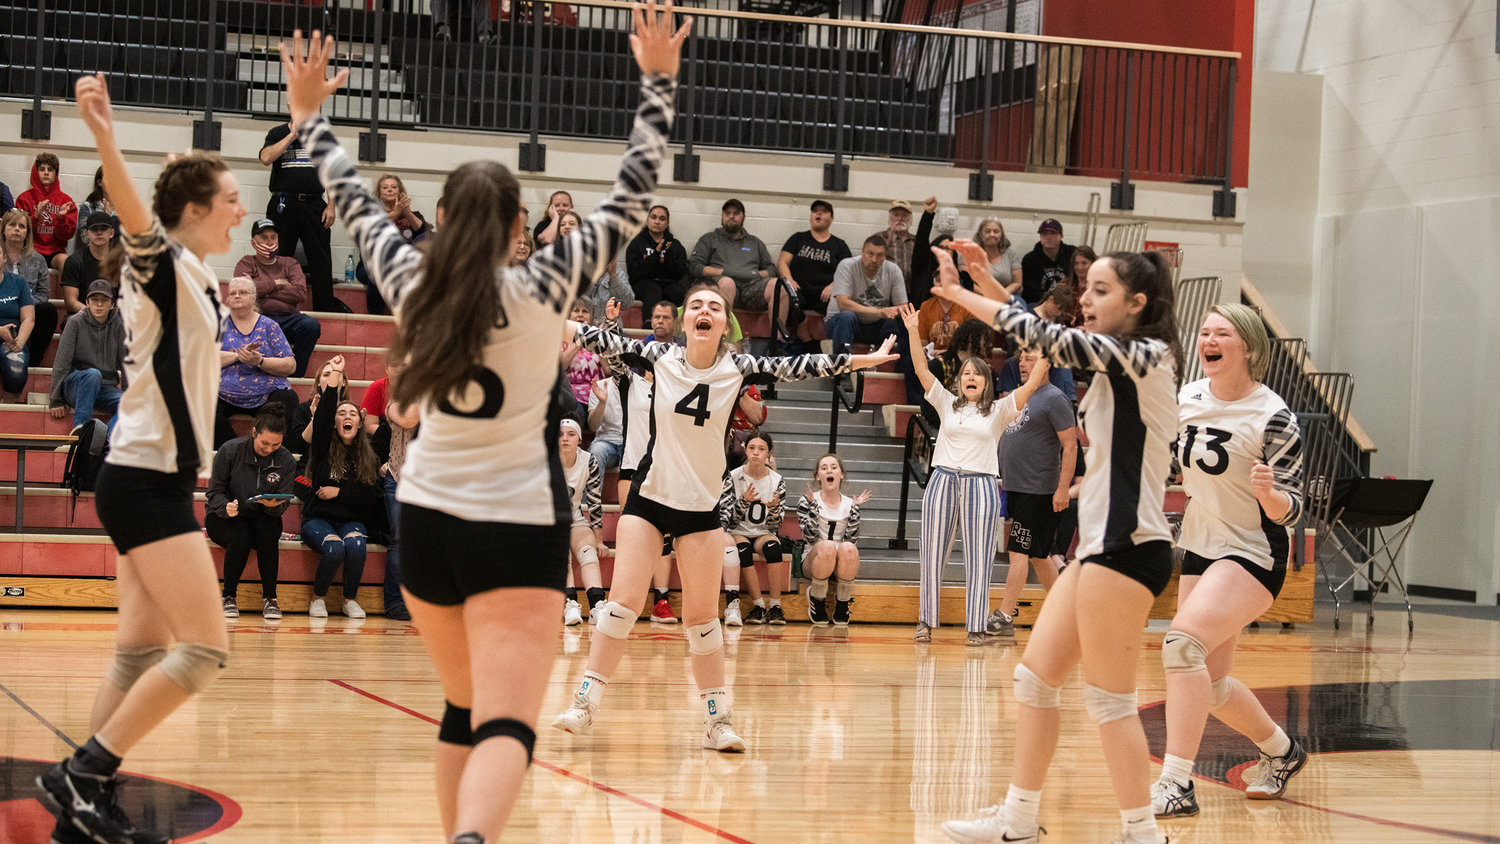 Riverhawks celebrate a point during a game against Rainier on Tuesday.